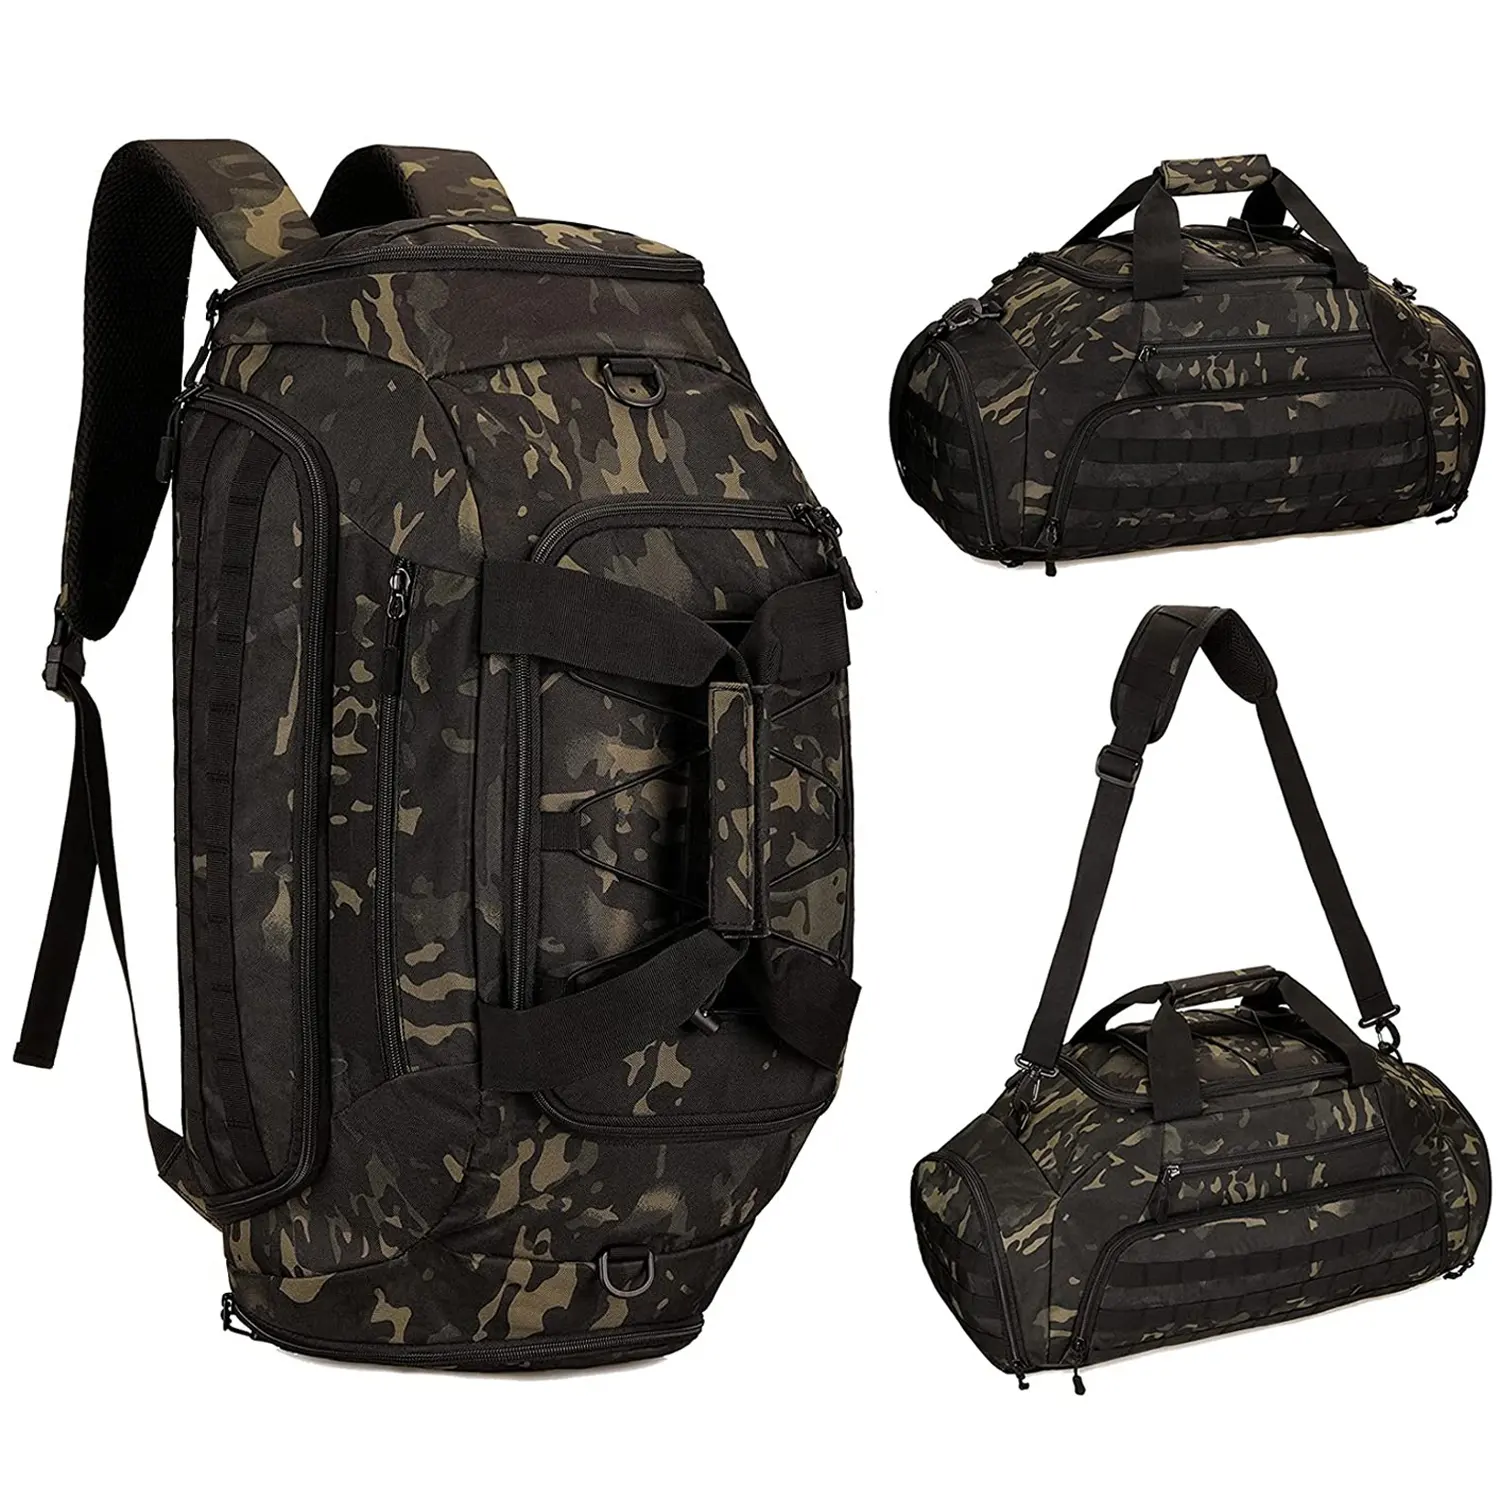 Tactical Duffle Backpack 45L Camouflage Sports Duffel Bag Backpack with Shoe Compartment Convertible Molly Backpack Custom